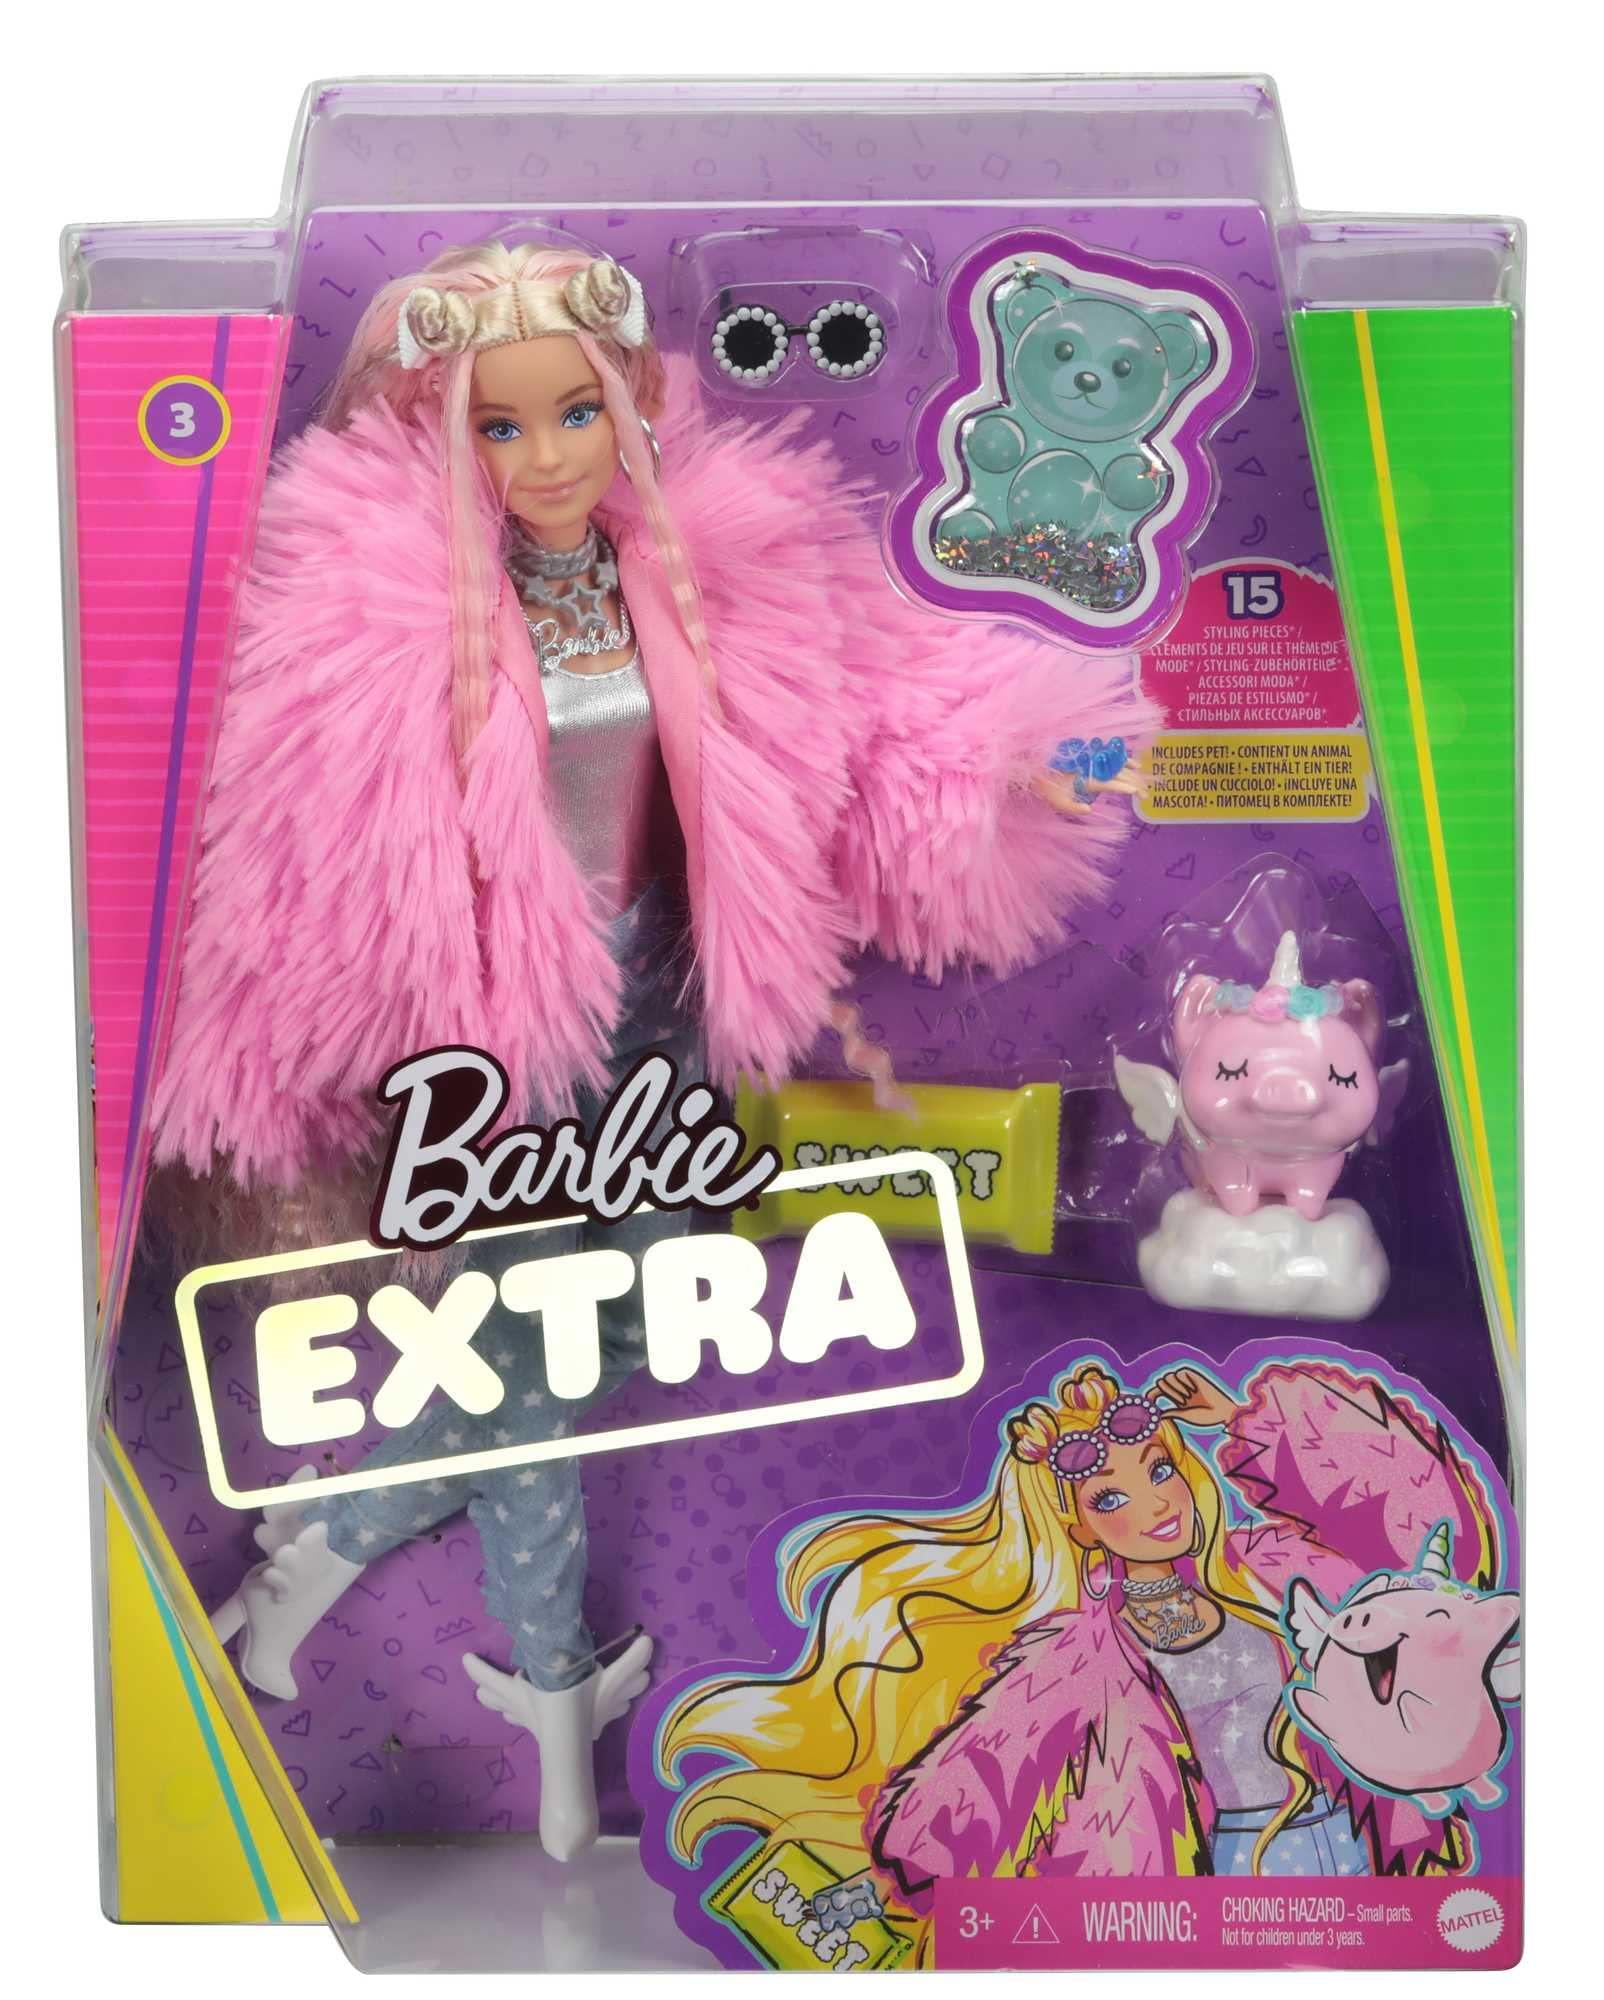 Barbie Extra #3 Doll Clothes: Silver Bodysuit